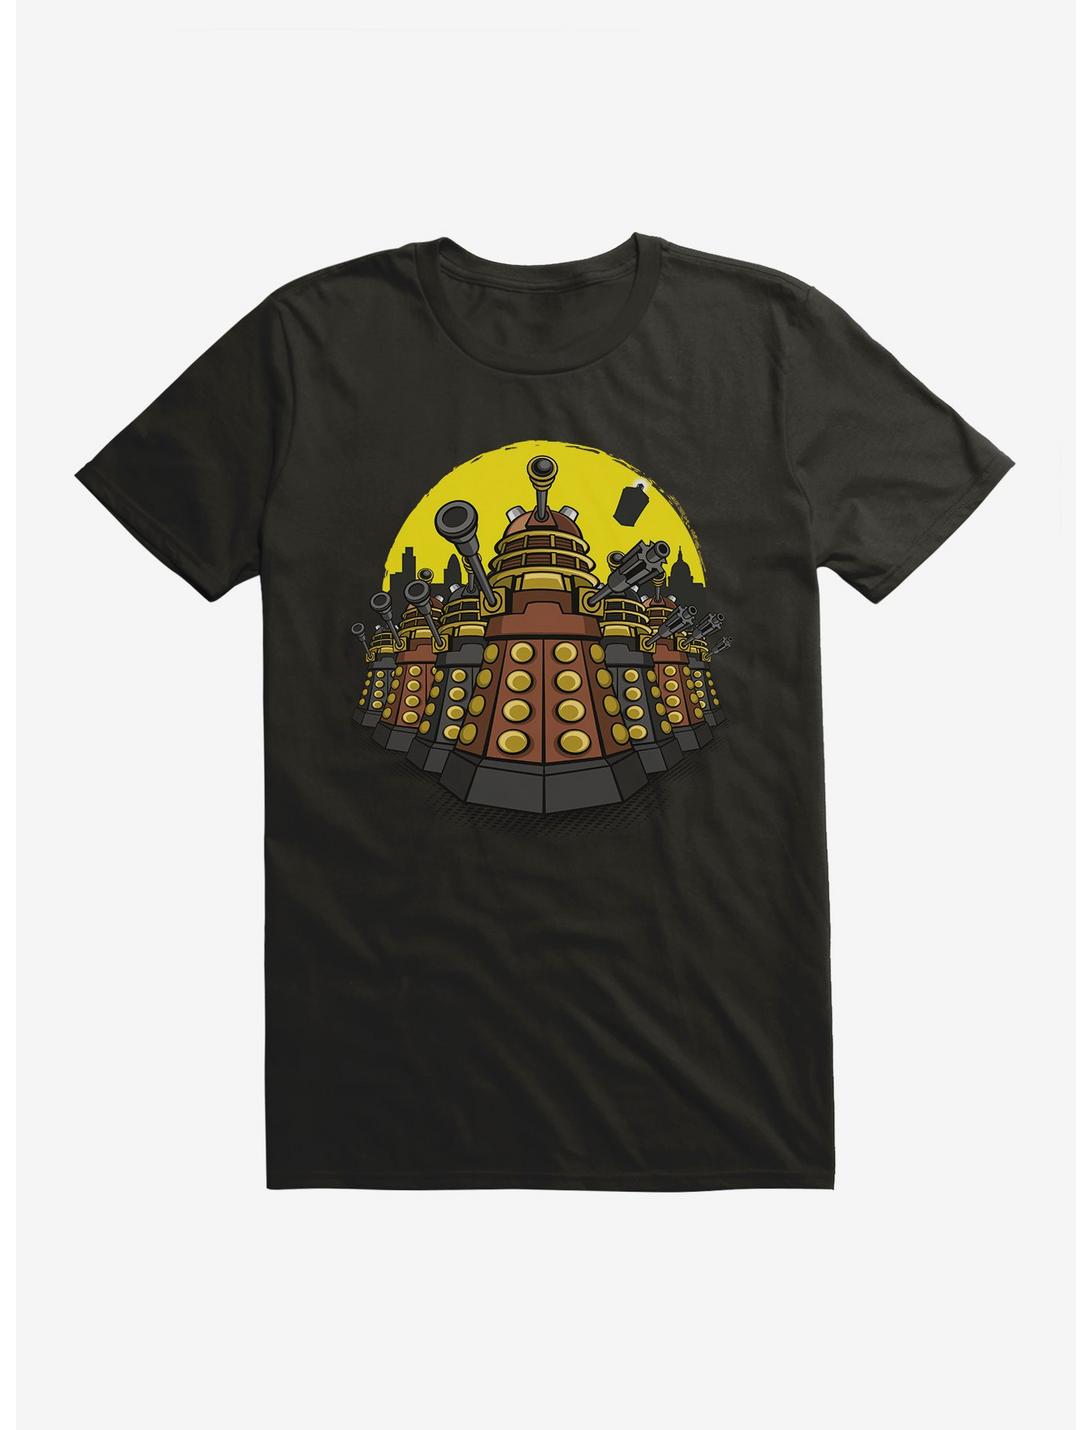 Doctor Who Army Of Daleks T-Shirt, BLACK, hi-res